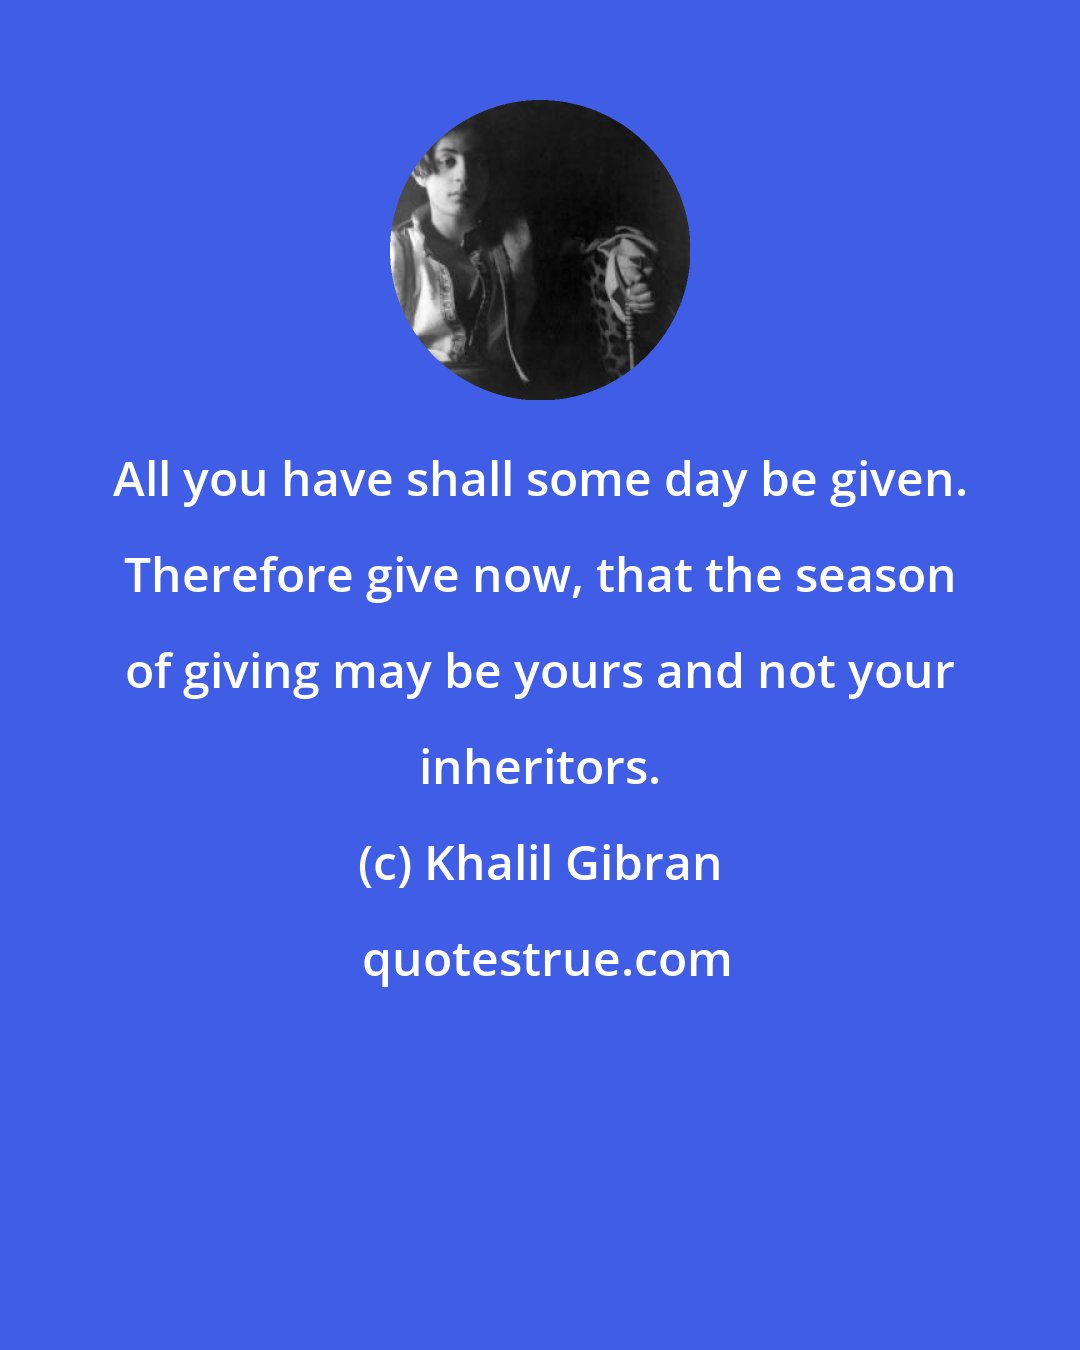 Khalil Gibran: All you have shall some day be given. Therefore give now, that the season of giving may be yours and not your inheritors.